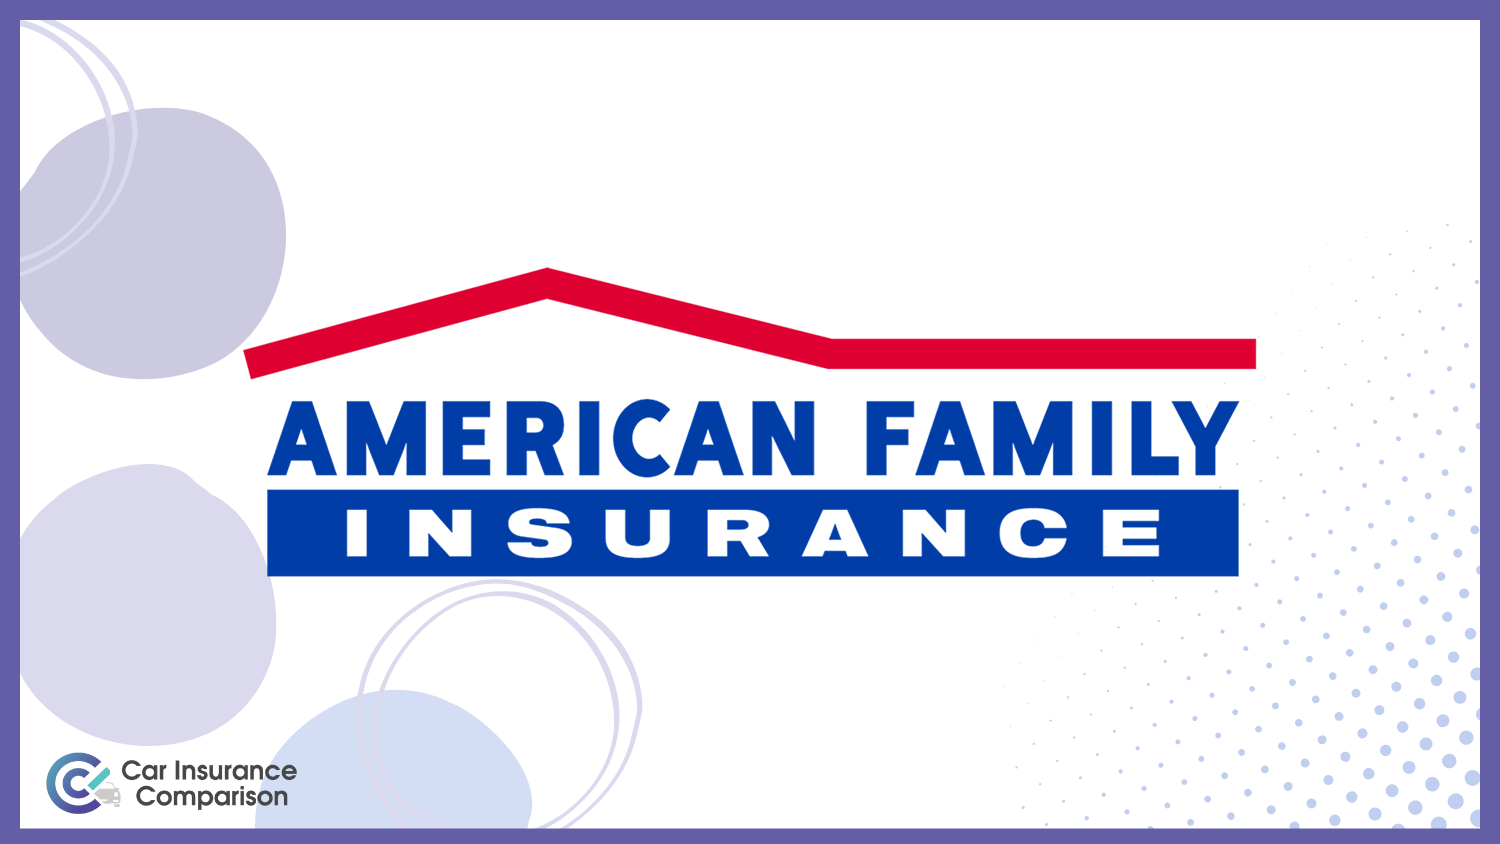 American Family: Compare Teen Driver Car Insurance Rates